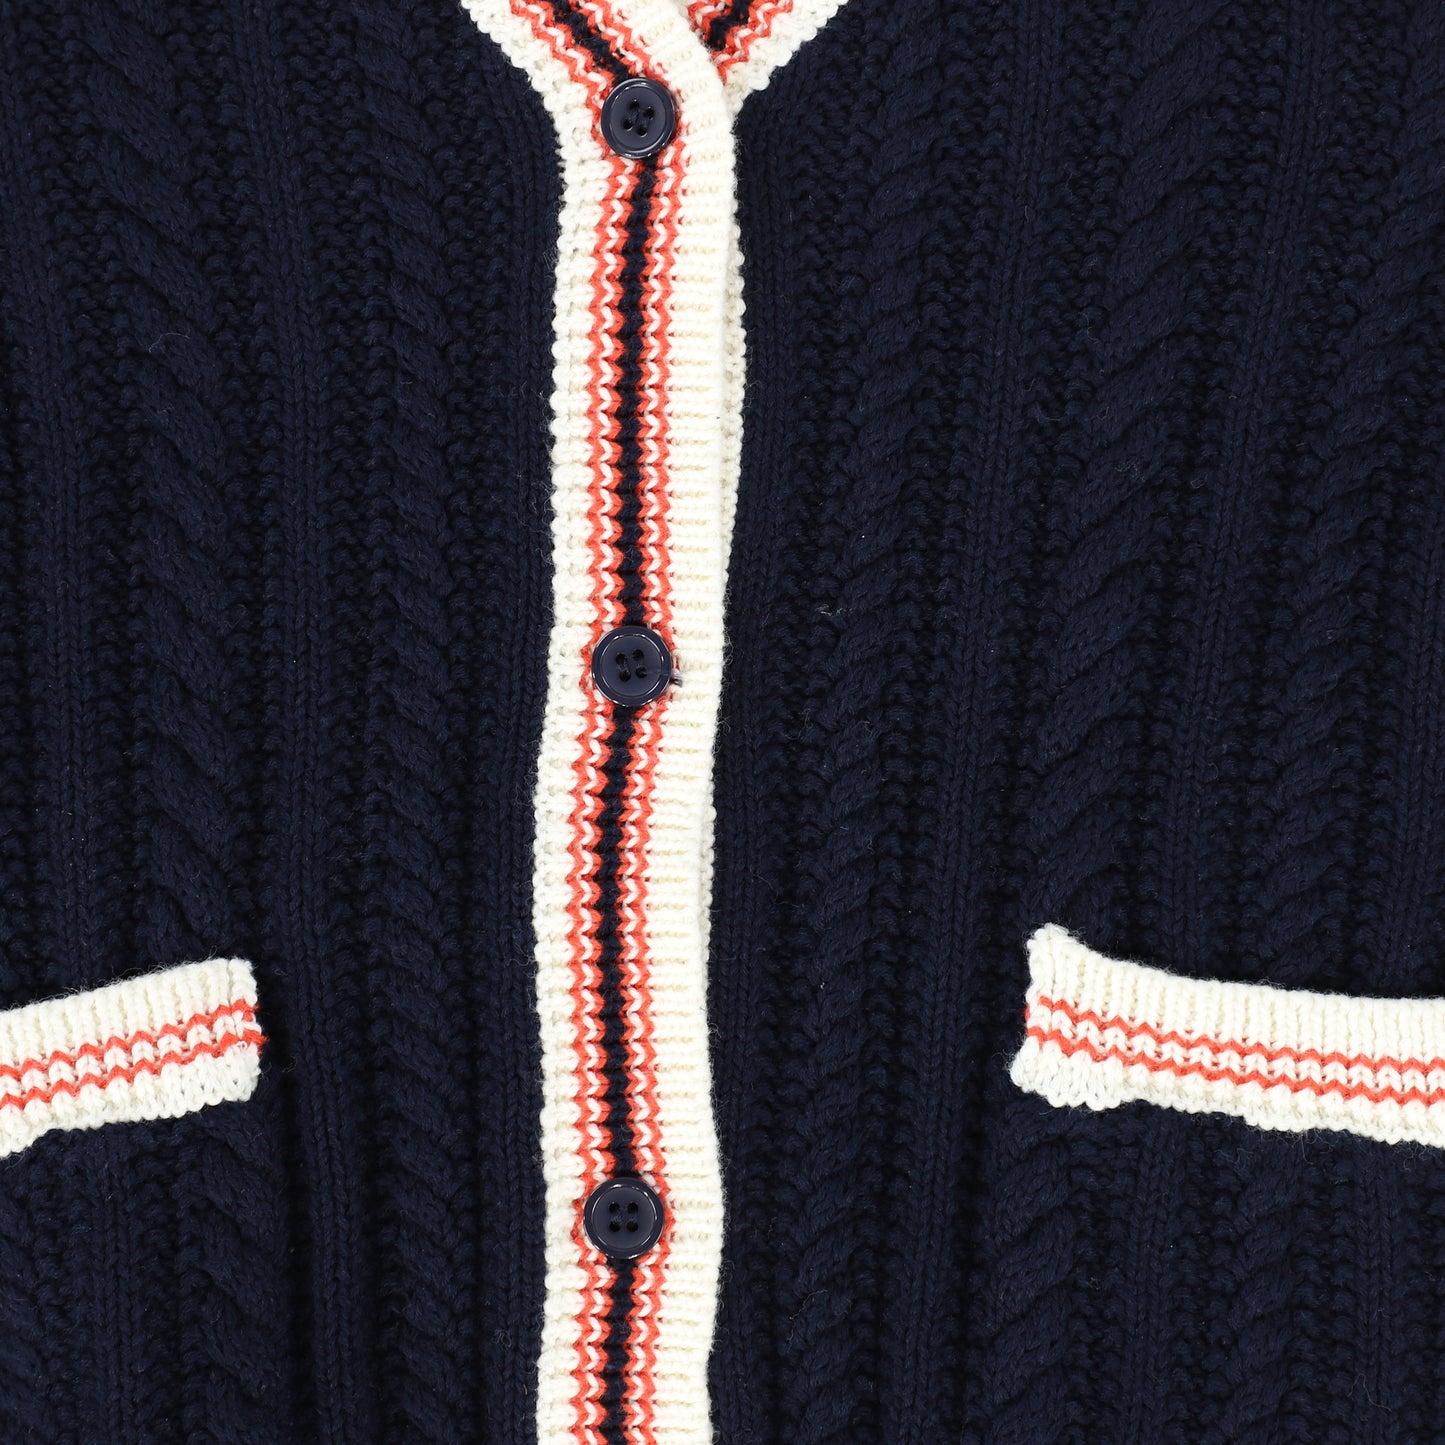 BAMBOO RED CABLE KNIT NAVY CARDIGAN WITH CONTRAST STITCHING [Final Sale]